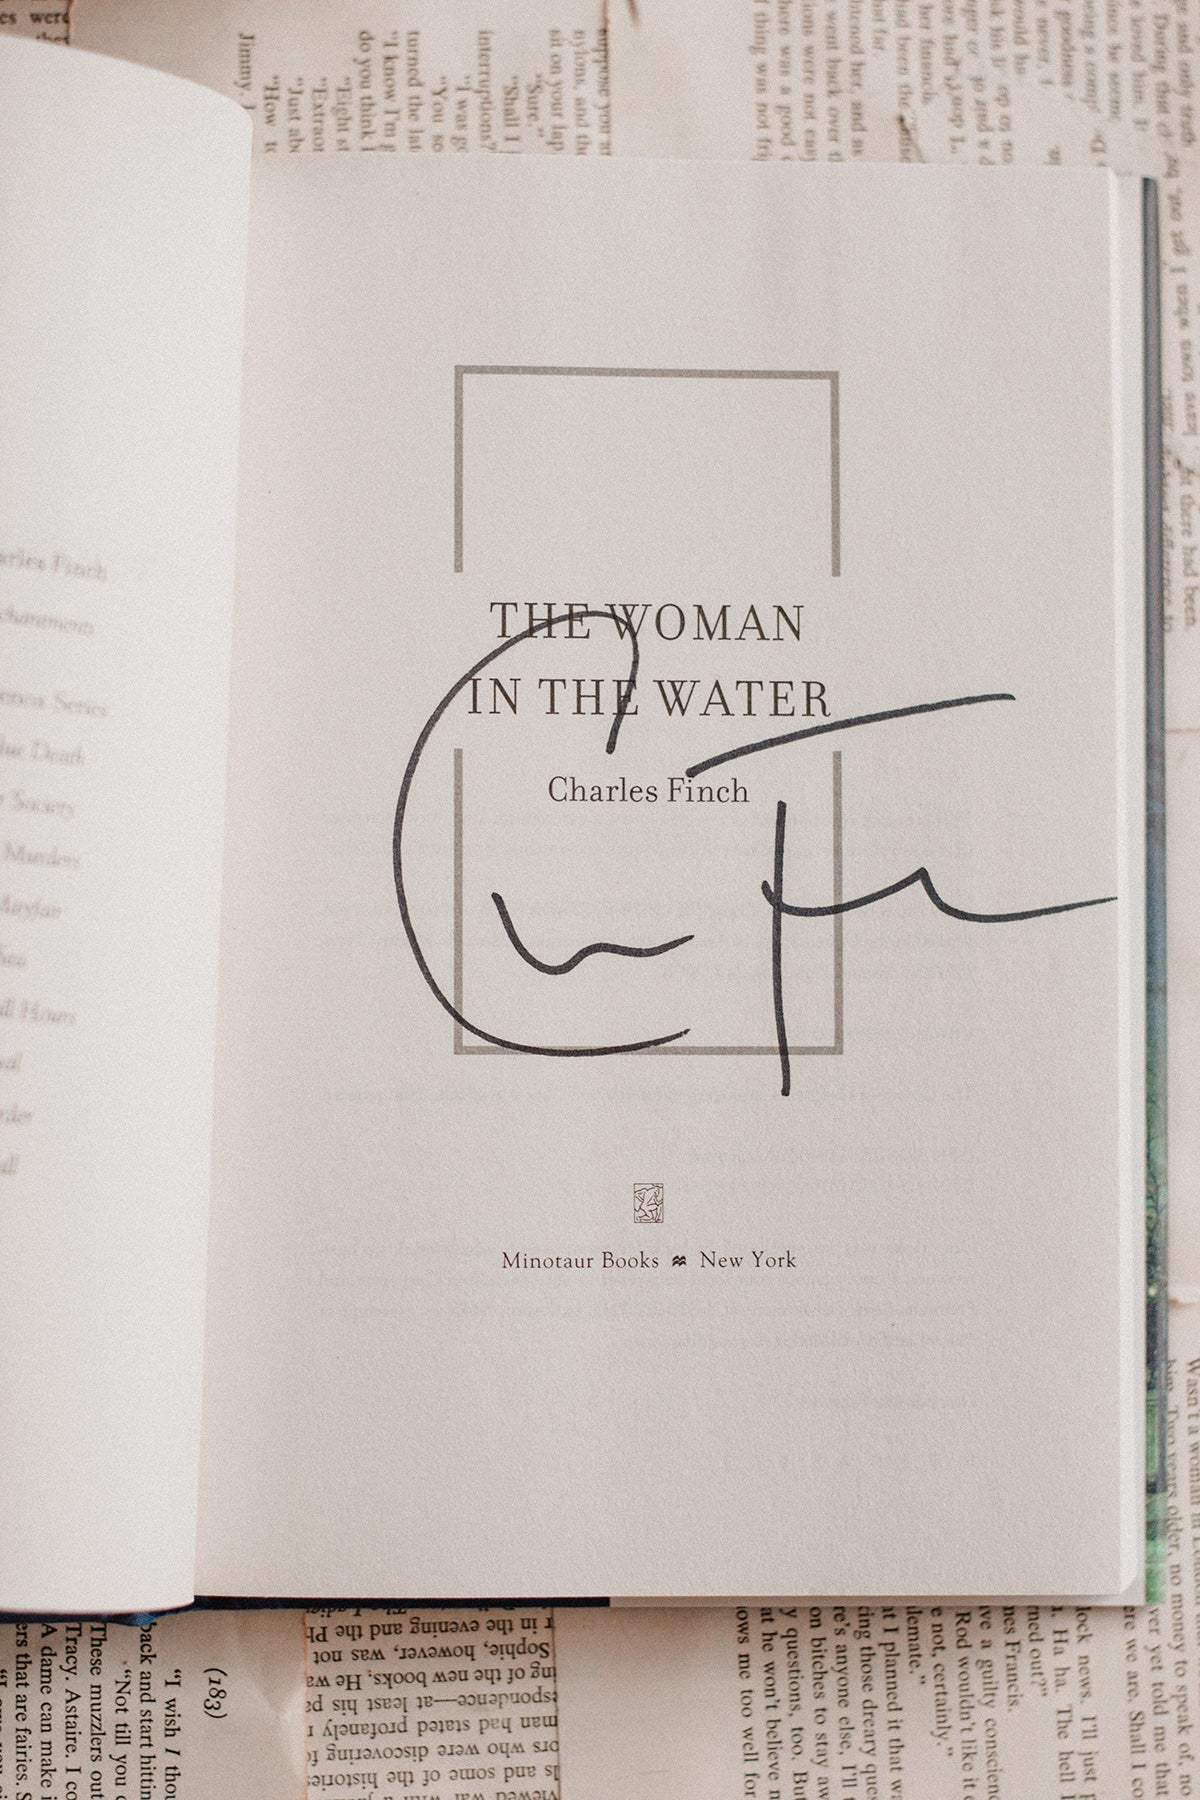 The Woman in the Water by Charles Finch